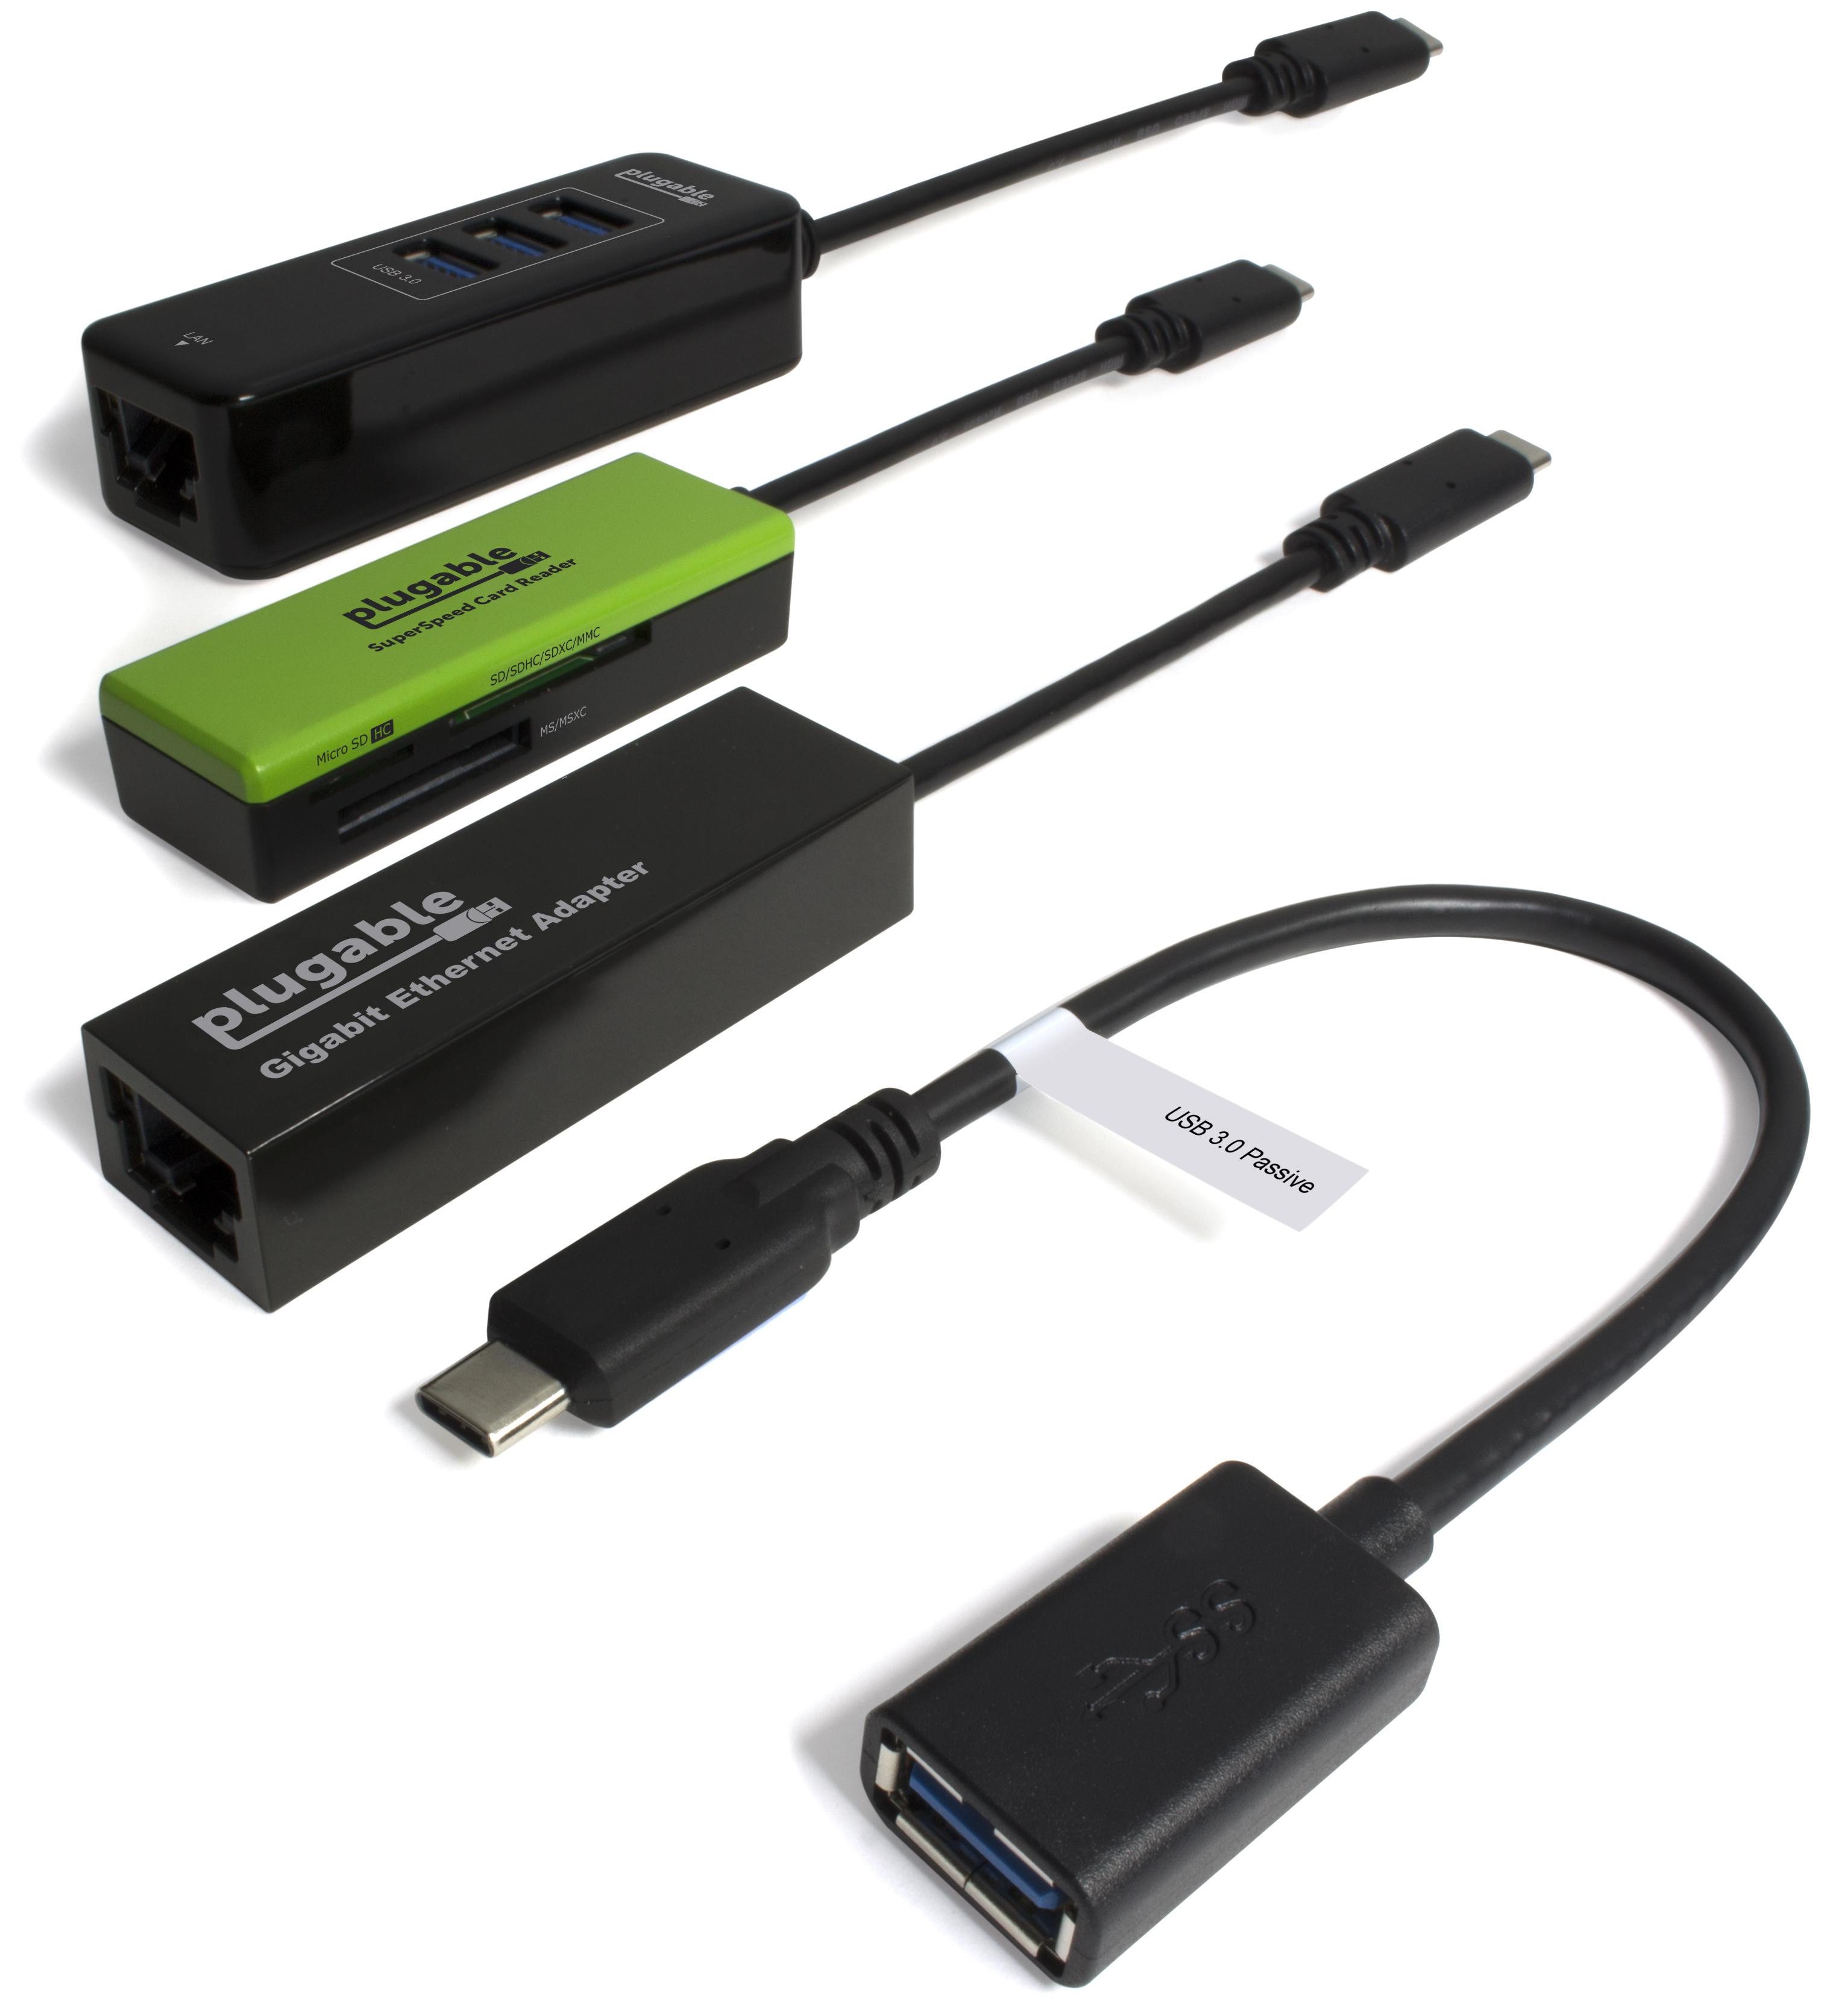 Plugable's four new cable adapters for USB-C devices